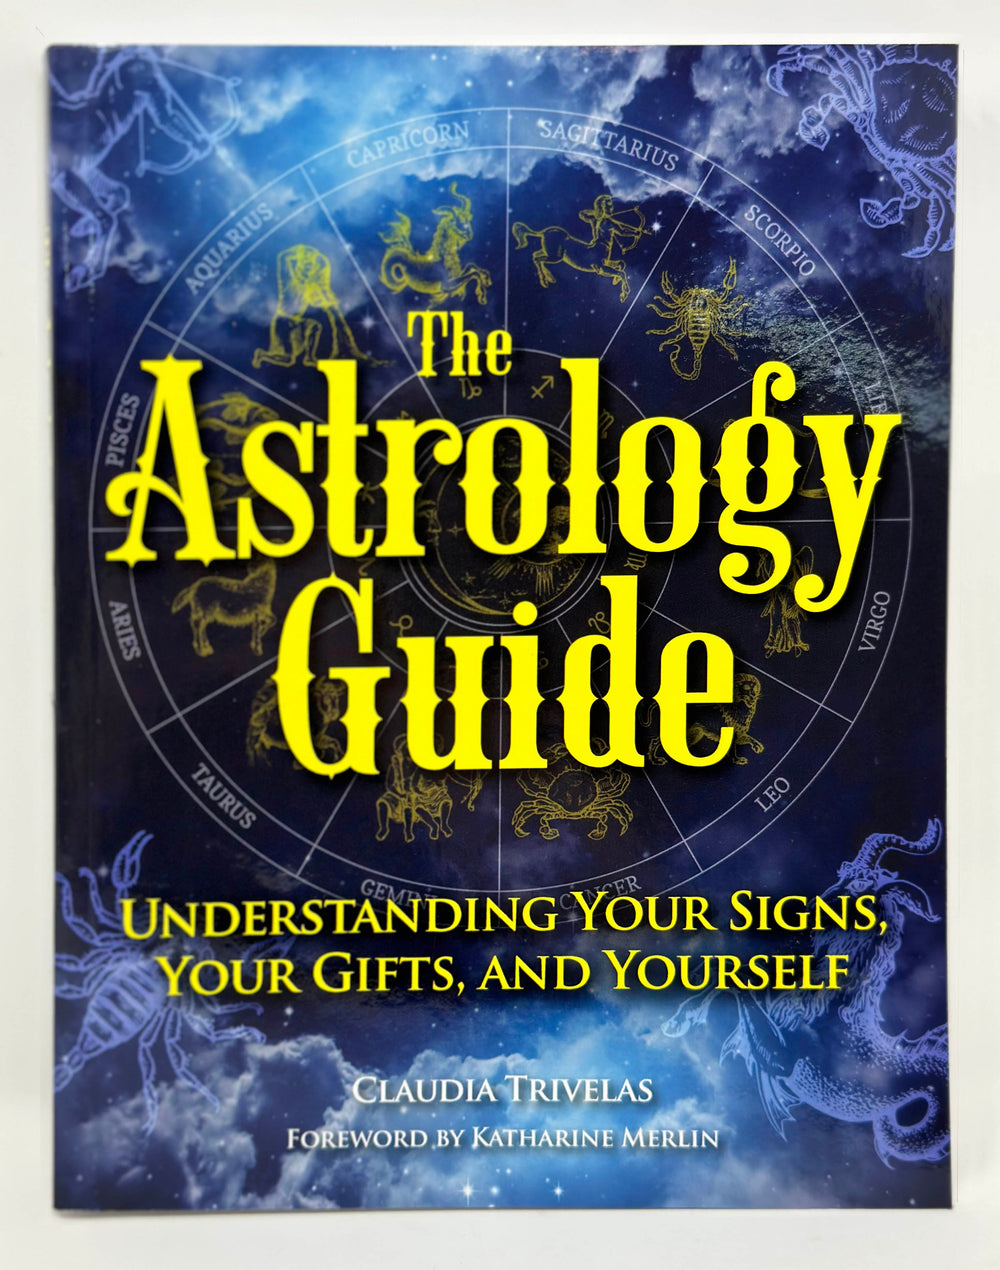 The Astrology Guide